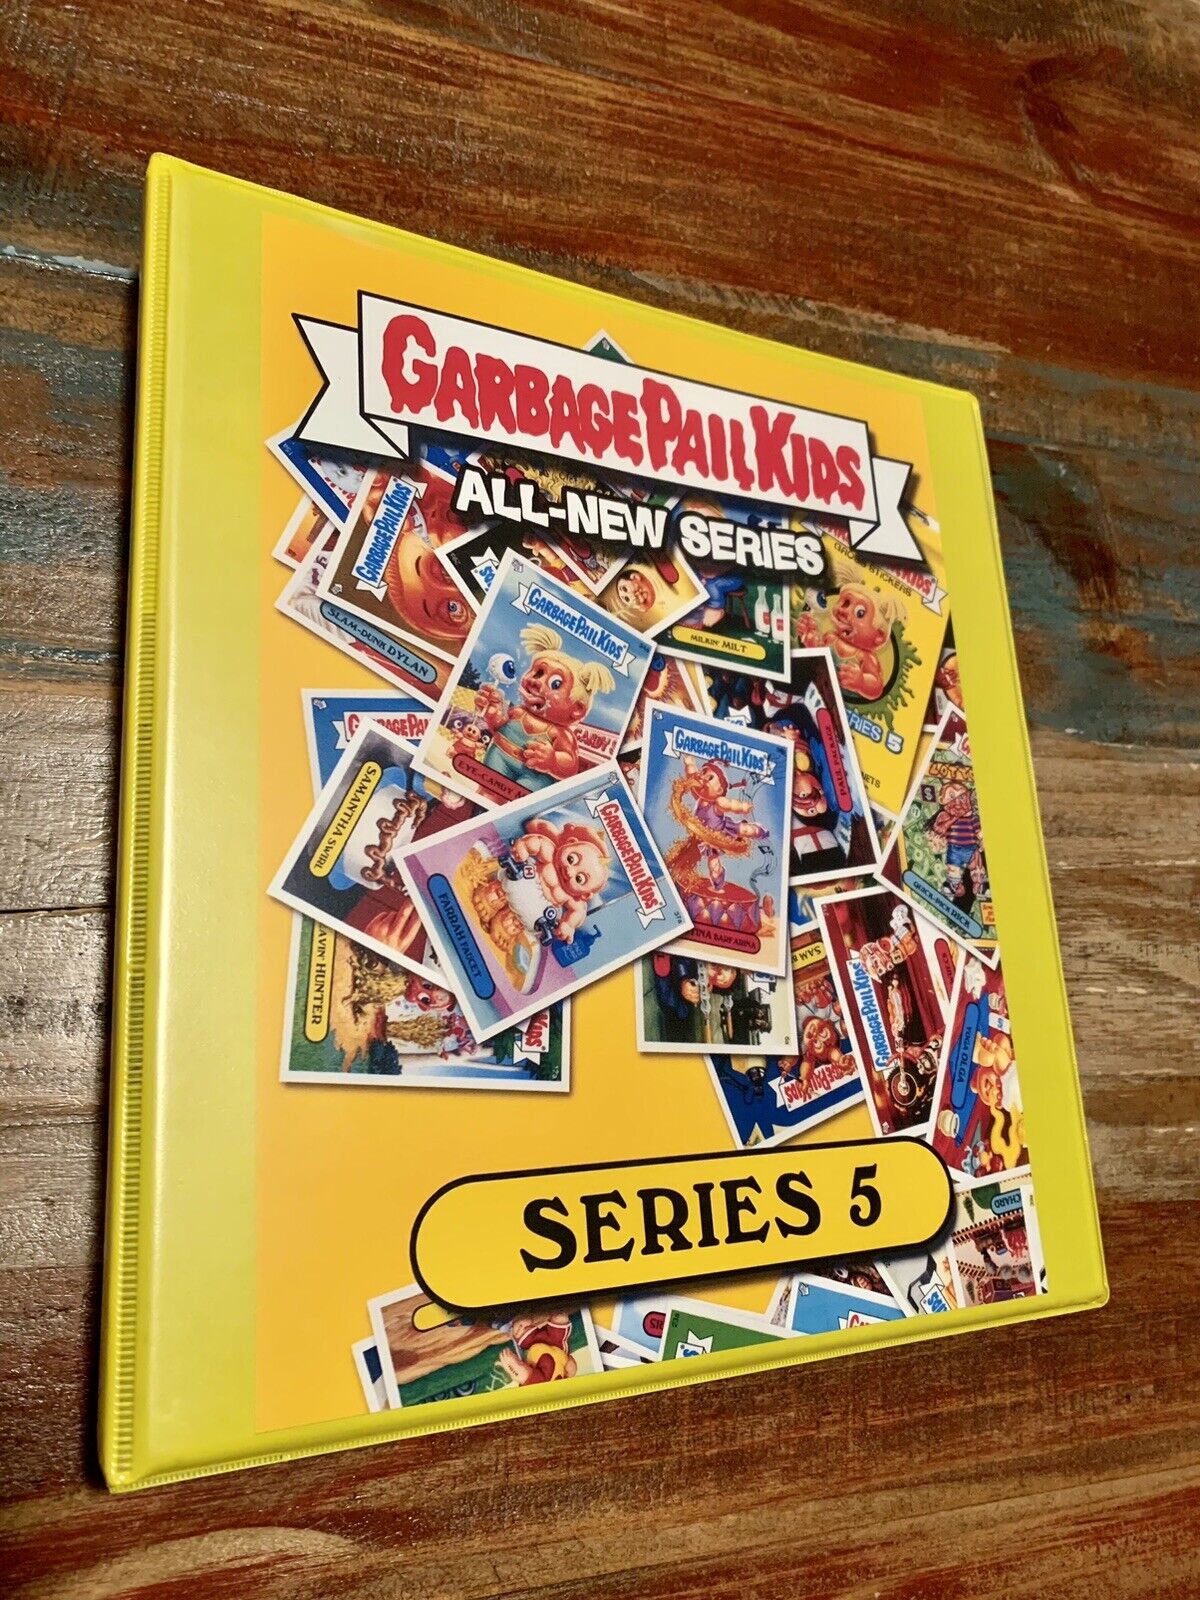 2006 TOPPS GARBAGE PAIL KIDS ANS 5 ALL NEW SERIES 5 COMPLETE 80 CARD BASE SET